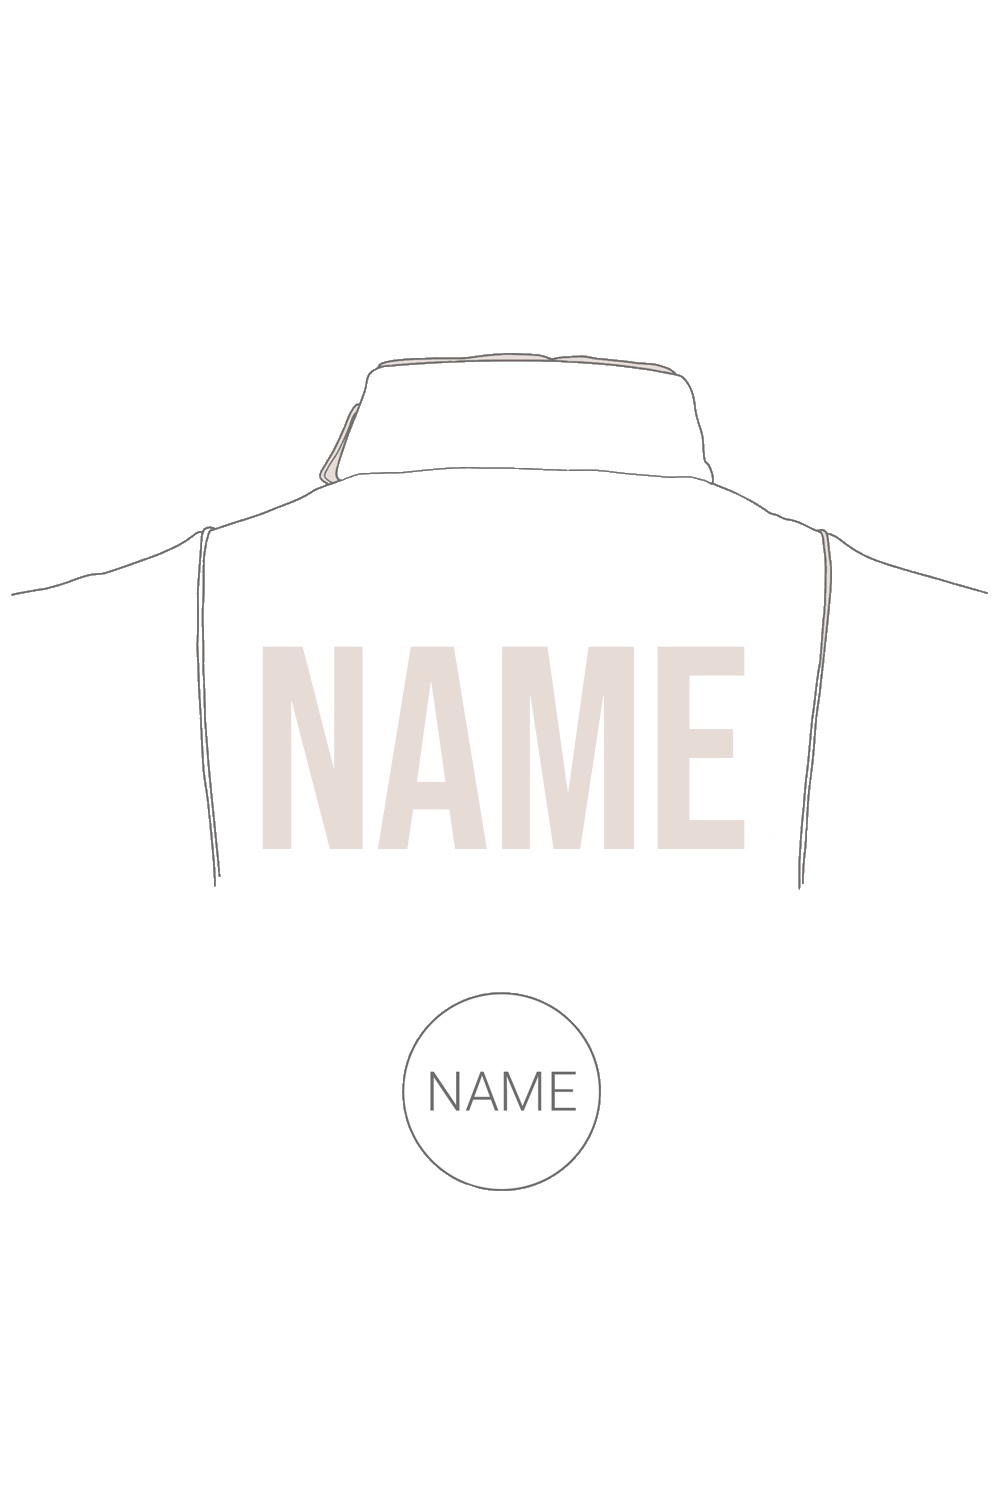 Name Printing on Fencing Jackets (foil print)